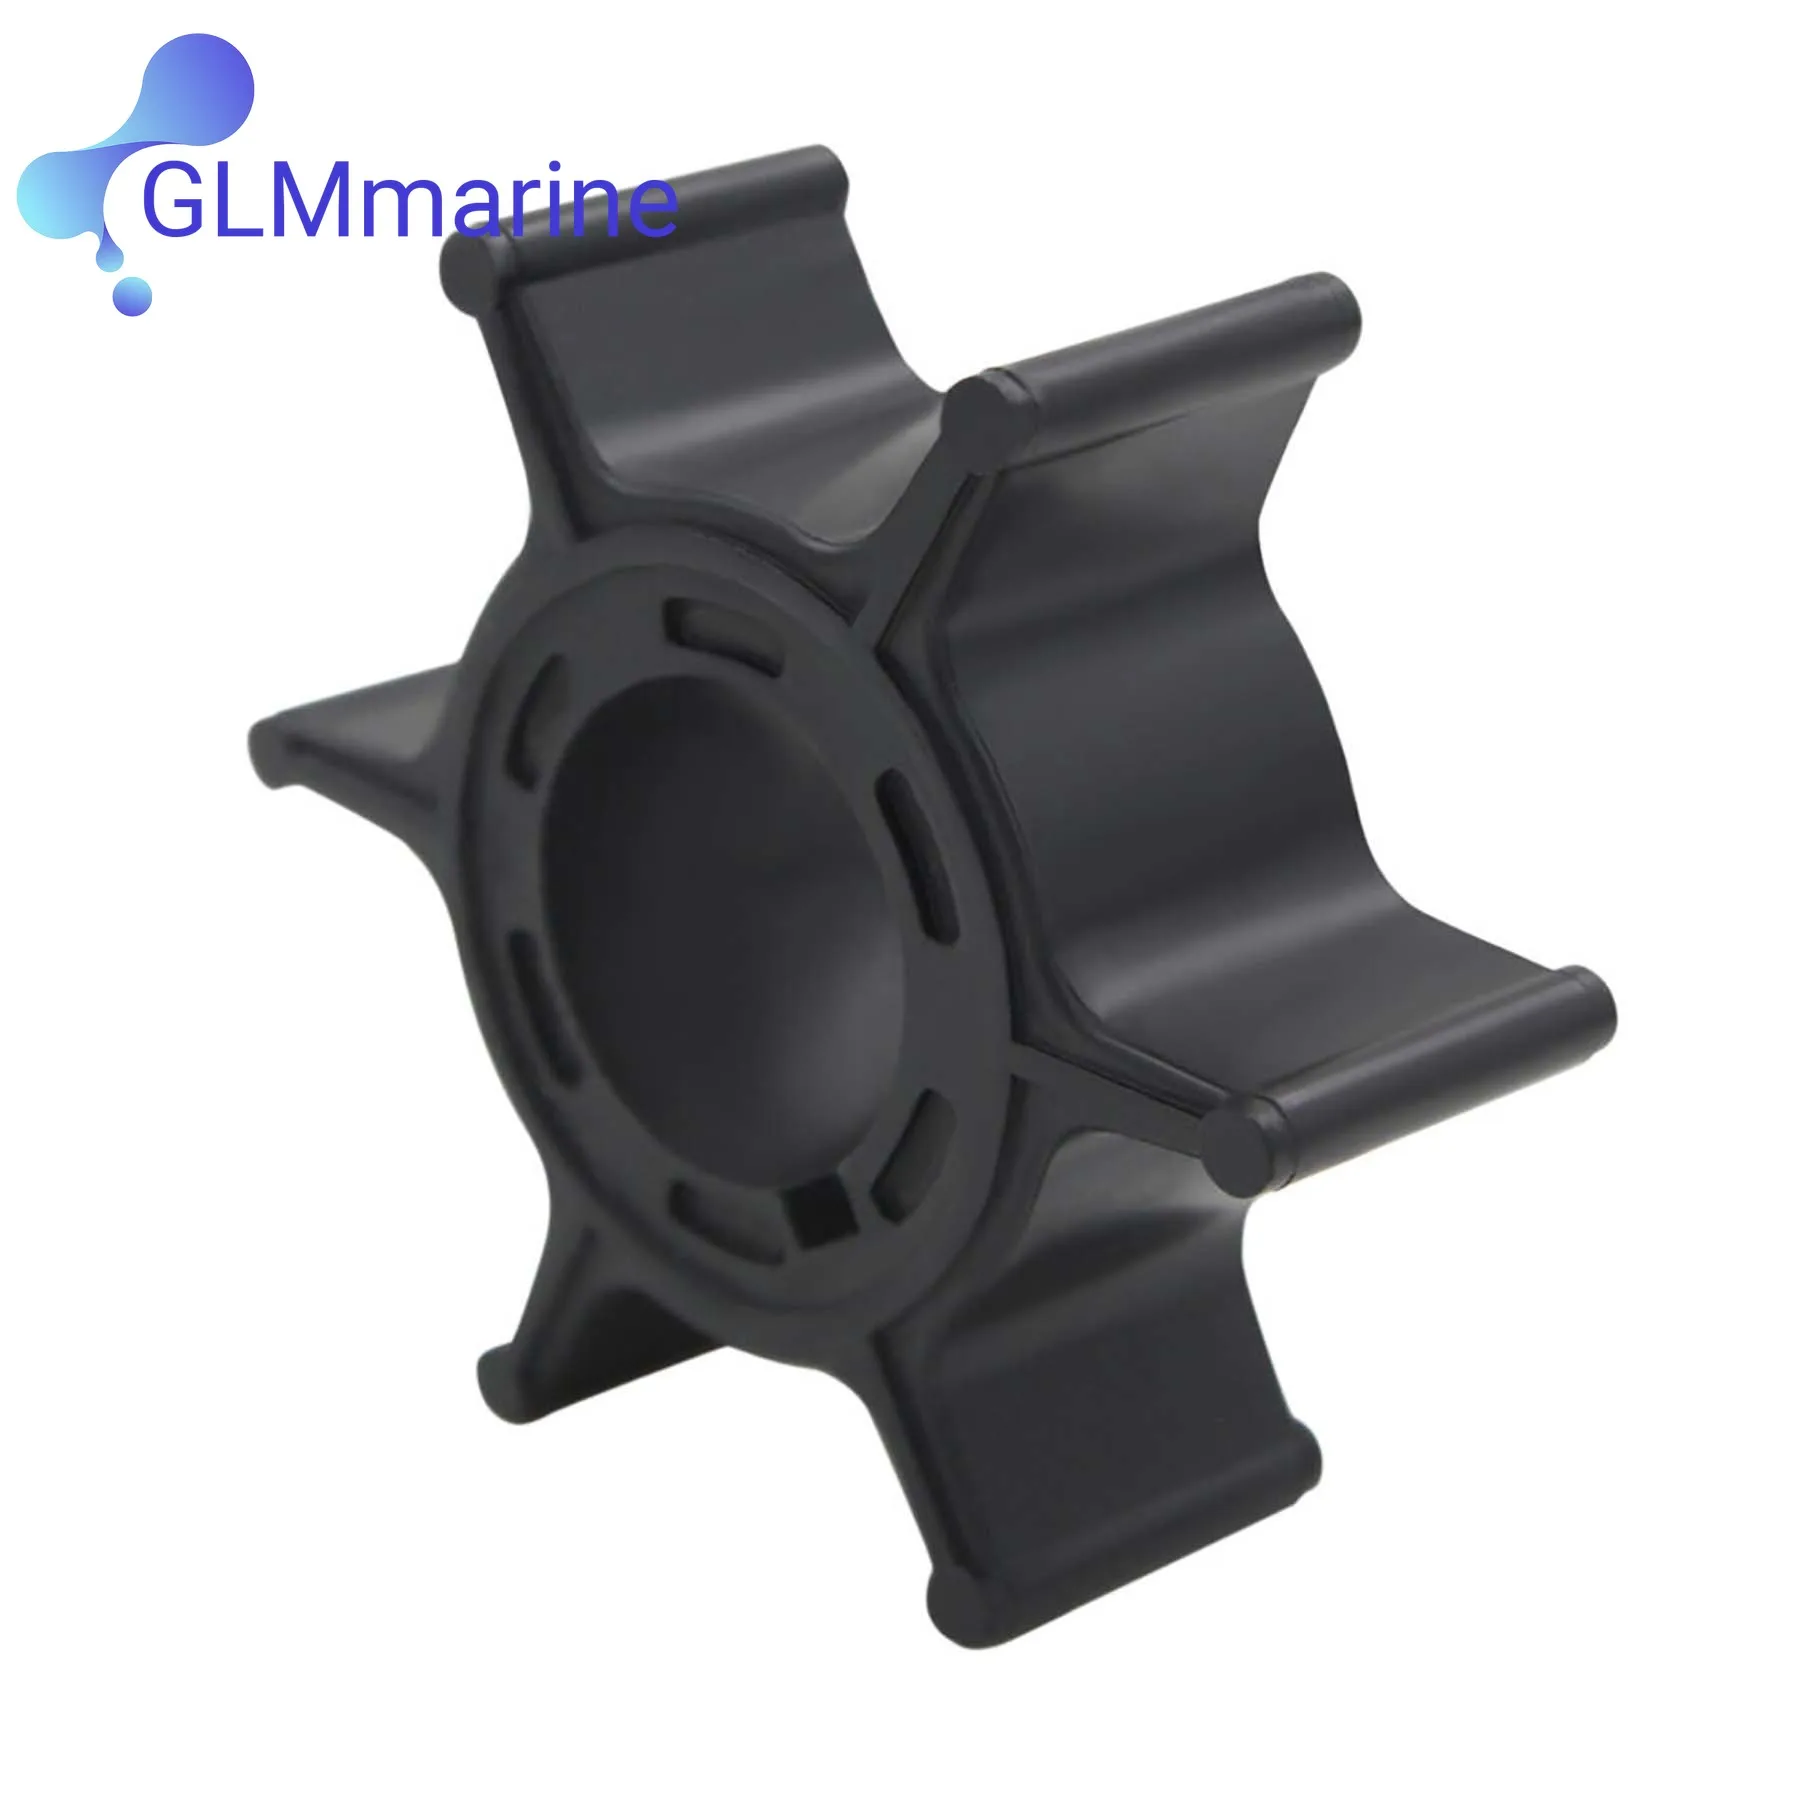 Water Pump Impeller 19210-ZW9-A31 For Honda 8 9.9 10 15 20 HP 4 Stroke BFP8D BFP9.9D BF15D BF20D Outboard Motor 19210-ZW9-A32